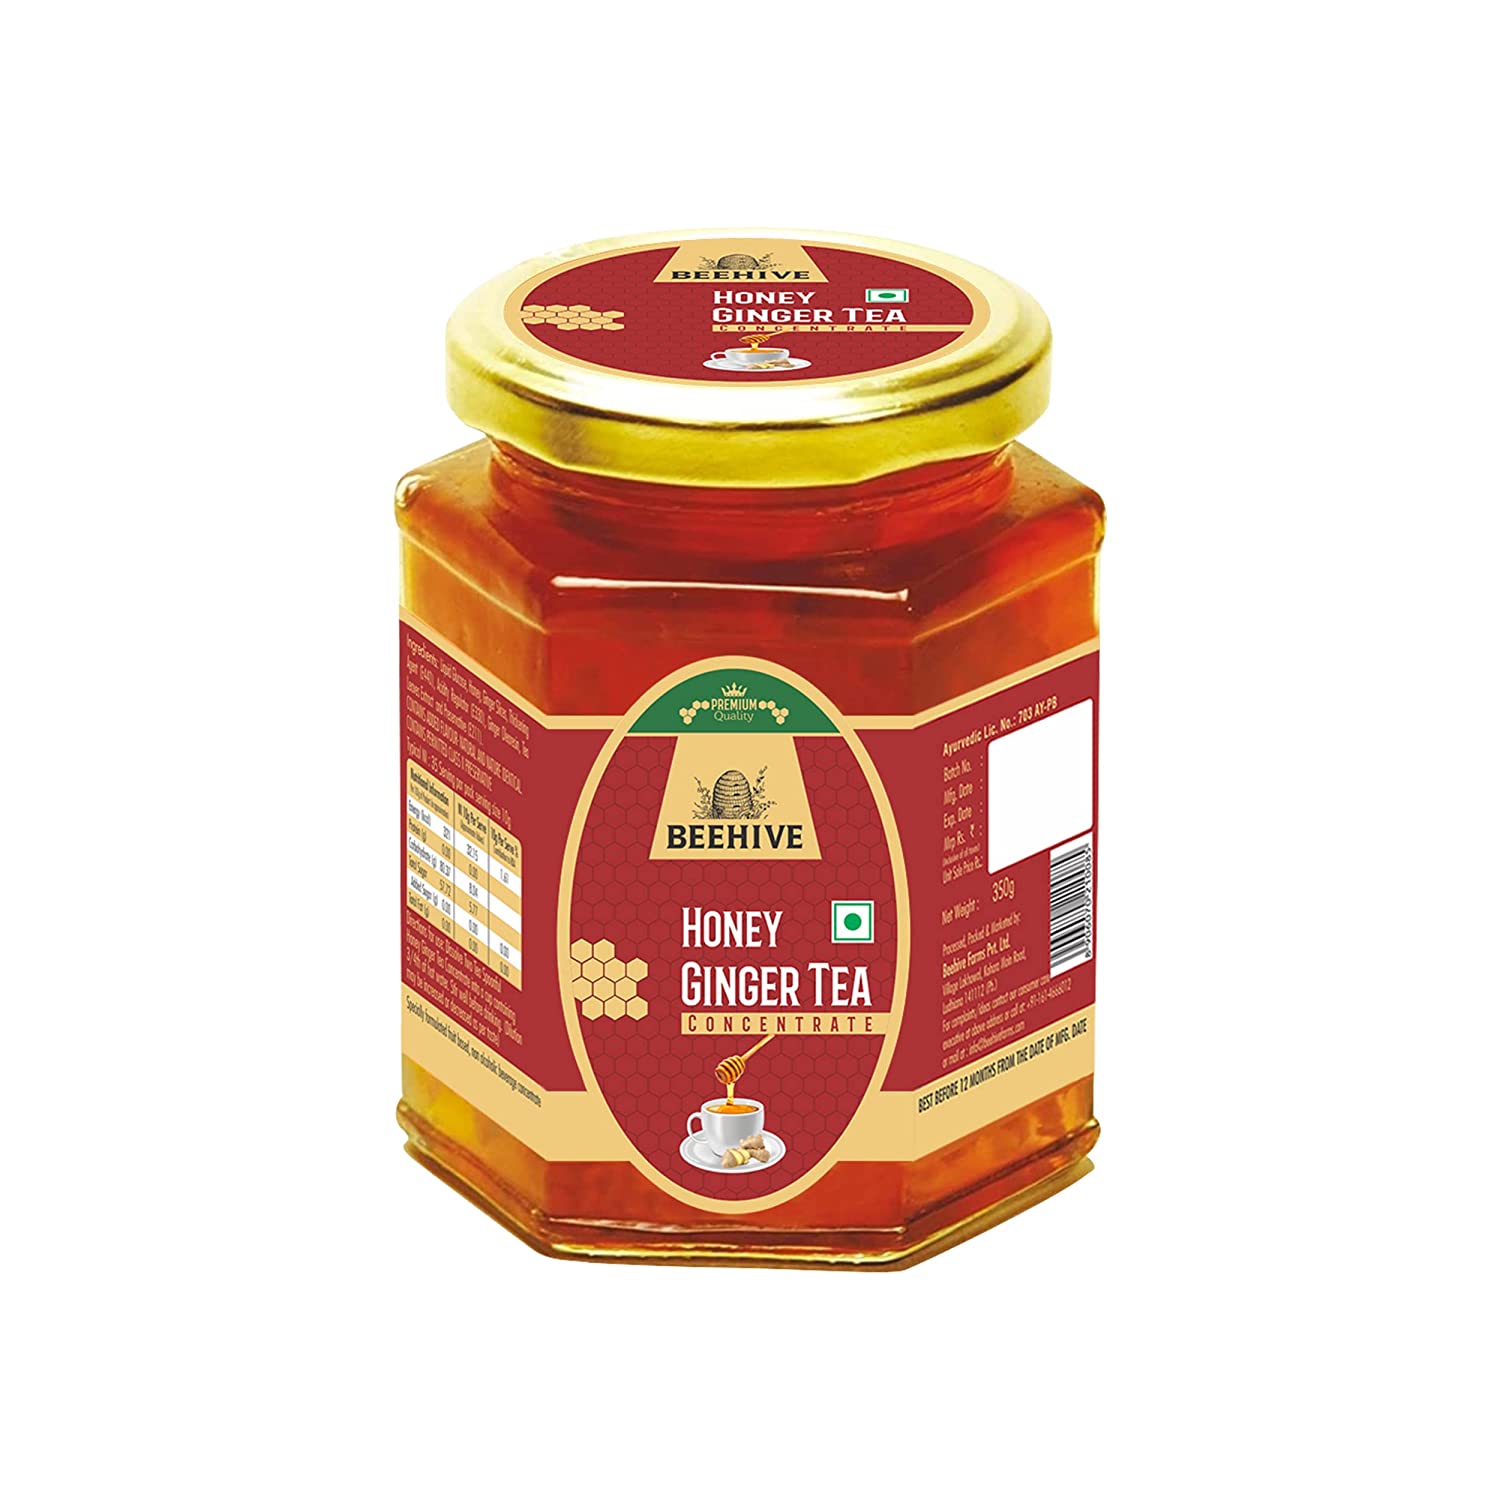 Beehive Honey and Ginger Tea Concentrates